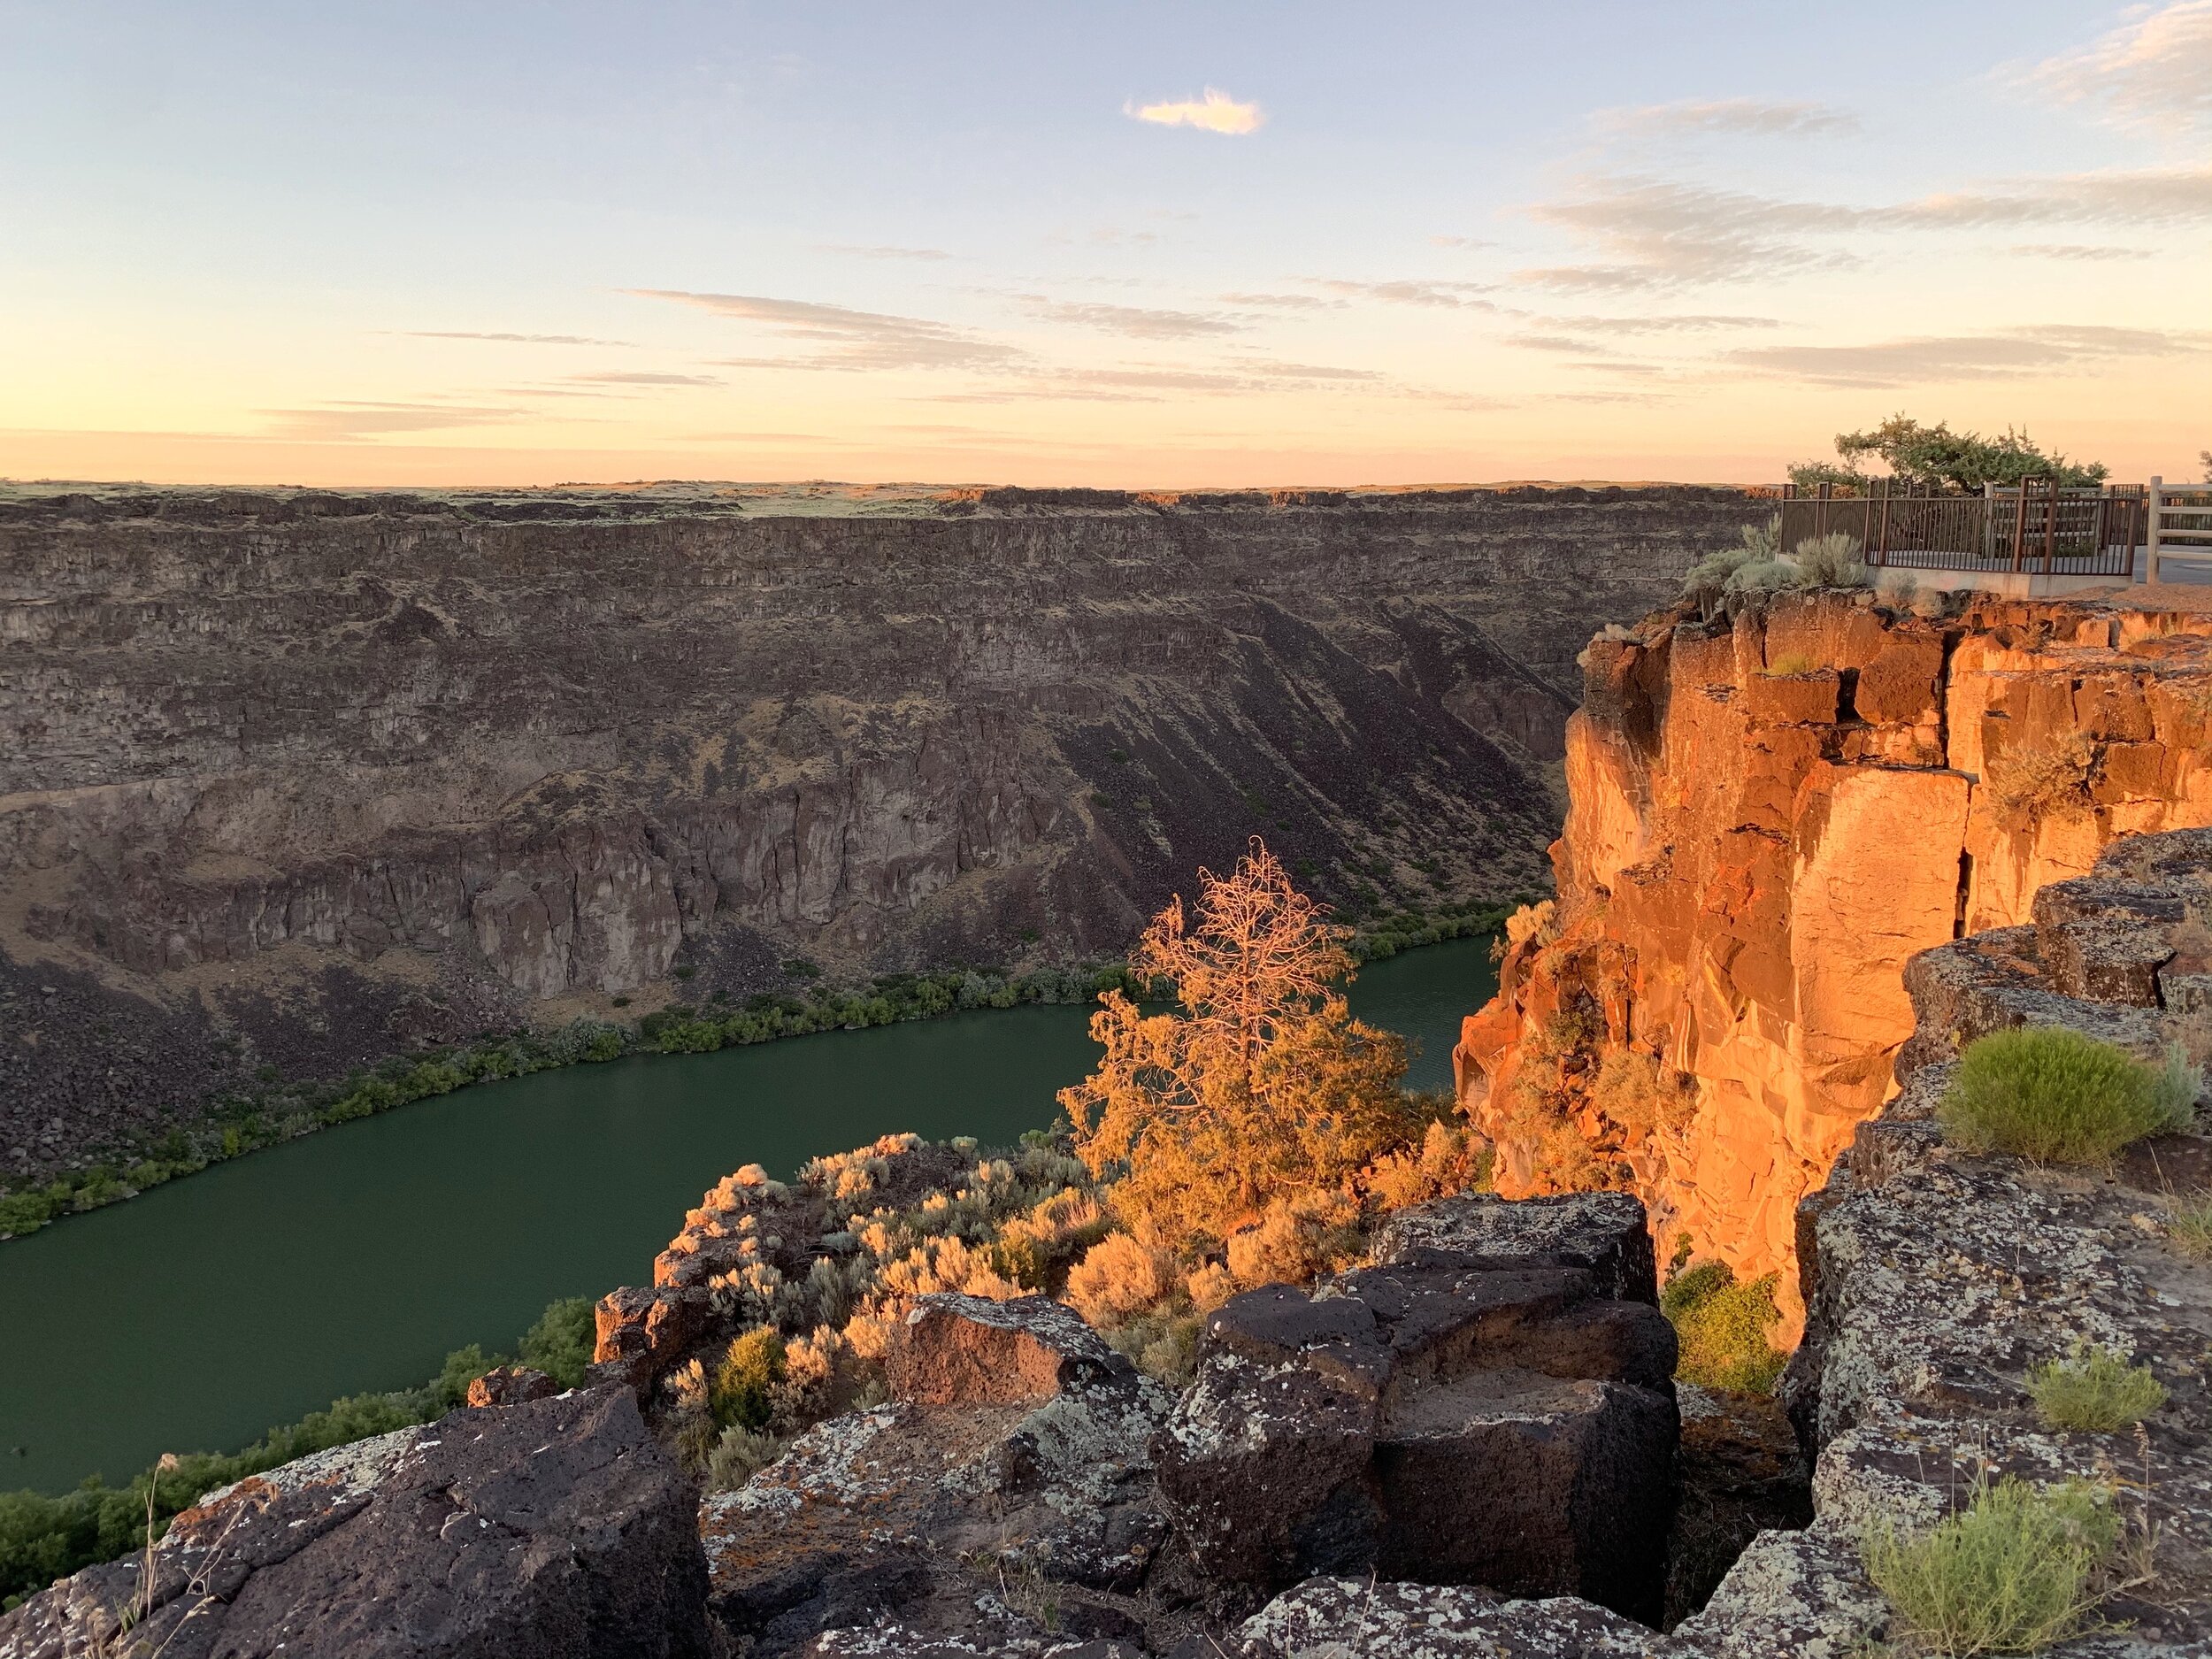  After observing the falls and marmots at Shoshone Falls Park, we heard we should drive a few miles down the Snake River to see the Perrine Bridge. It seems our timing was perfect; we arrived just as the sun was beginning to set on the rocks. 